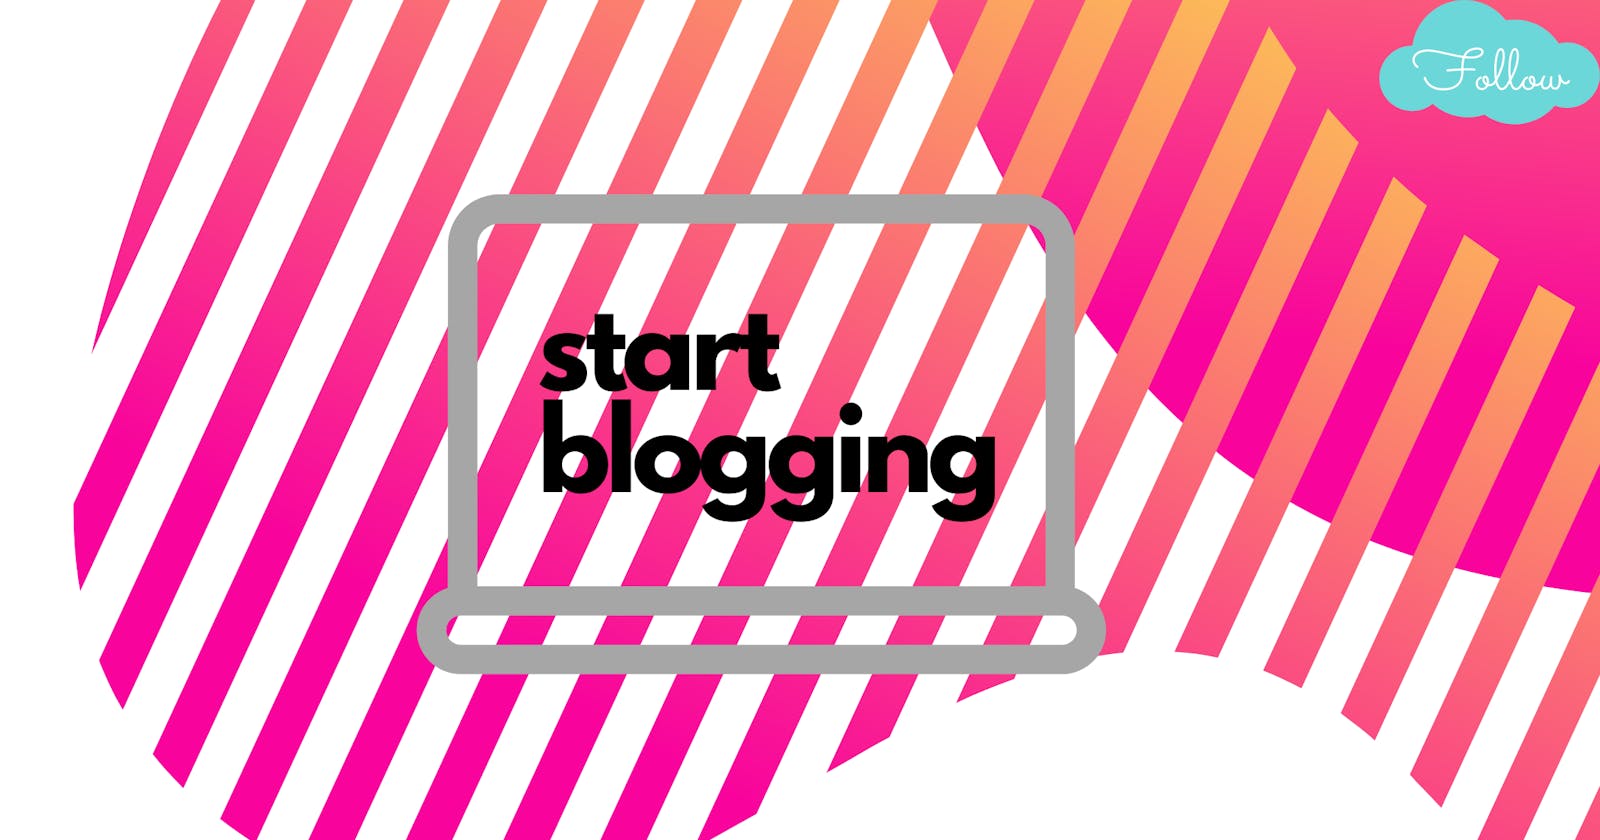 How to start blogging in 2021